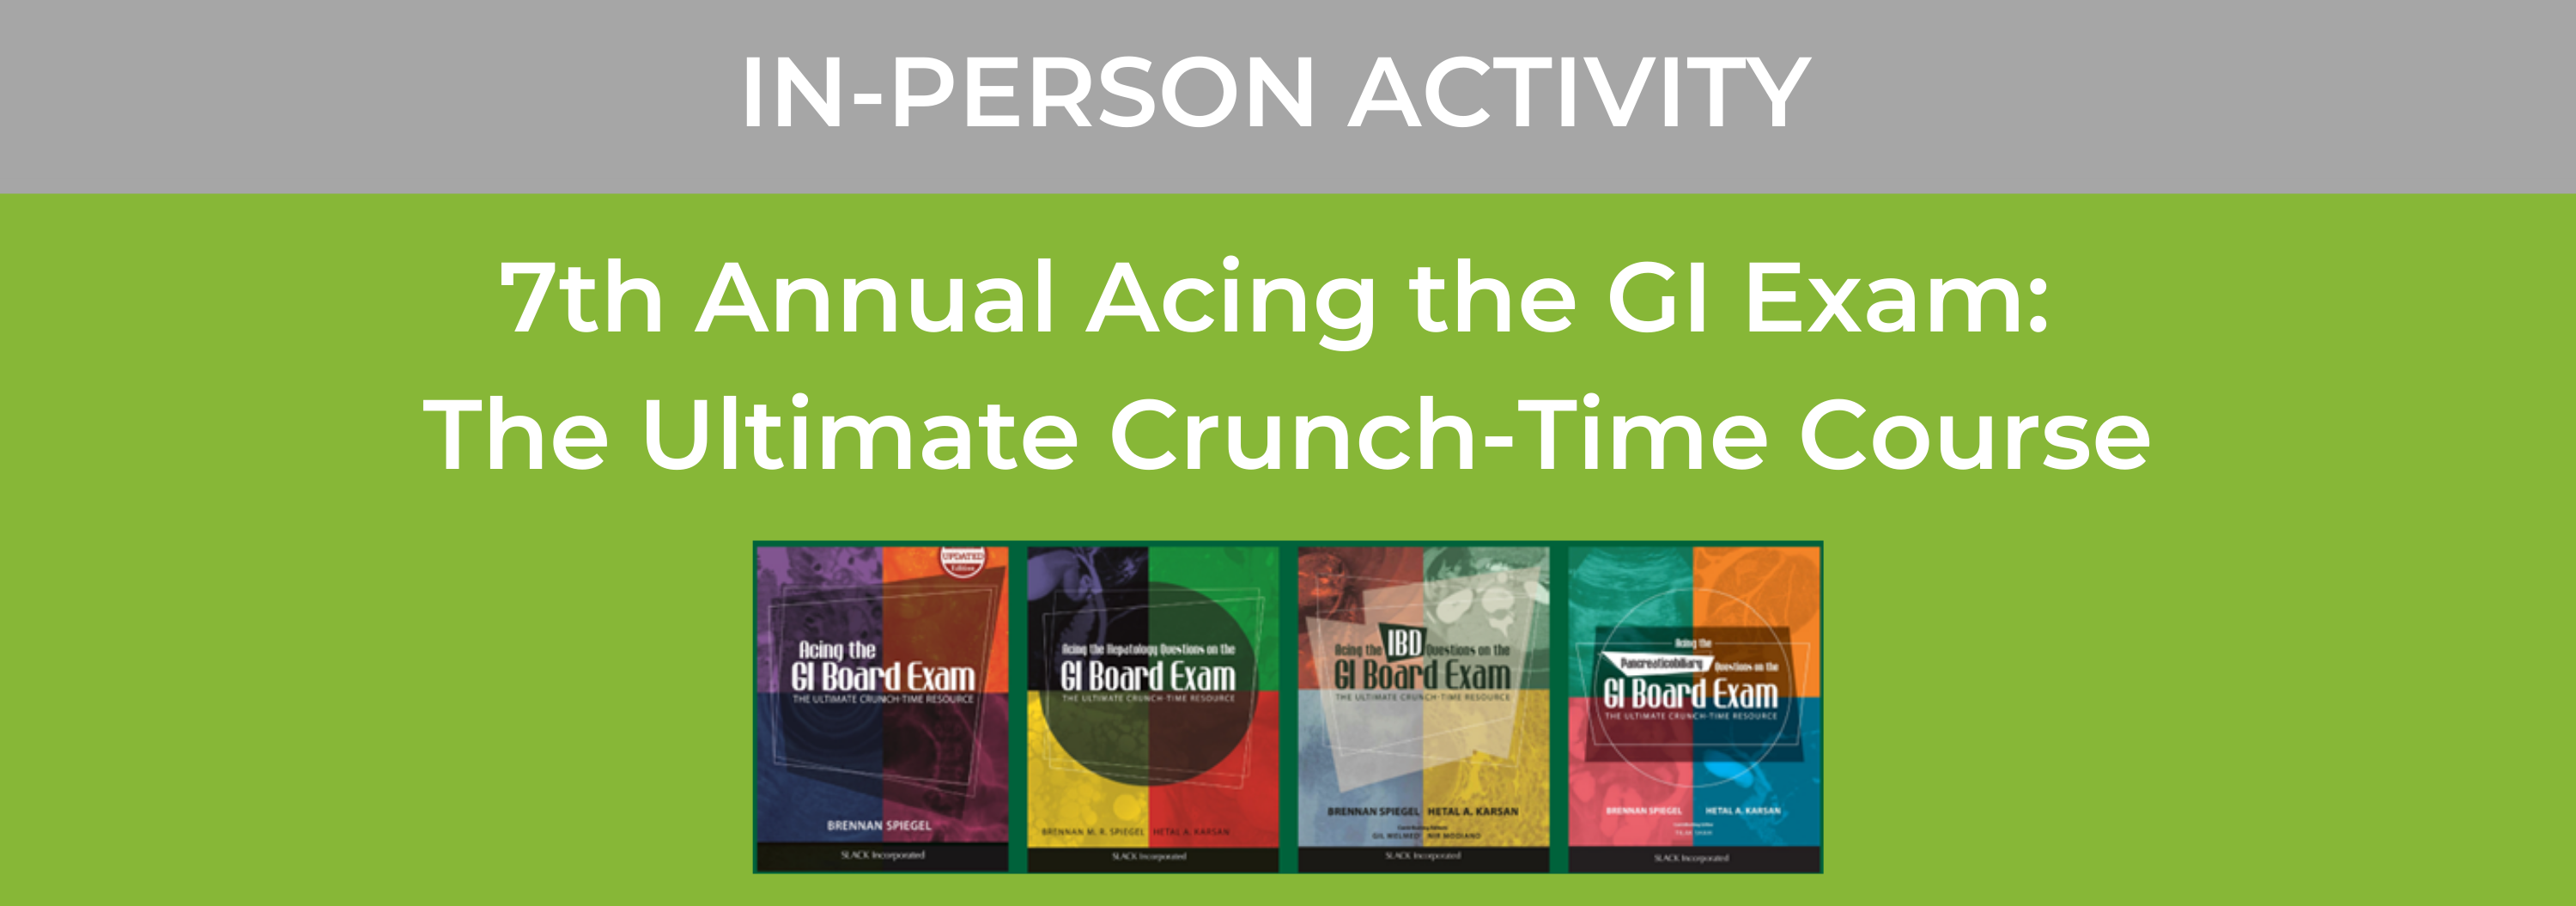 7th Annual Acing the GI Exam: The Ultimate Crunch-Time Course Banner